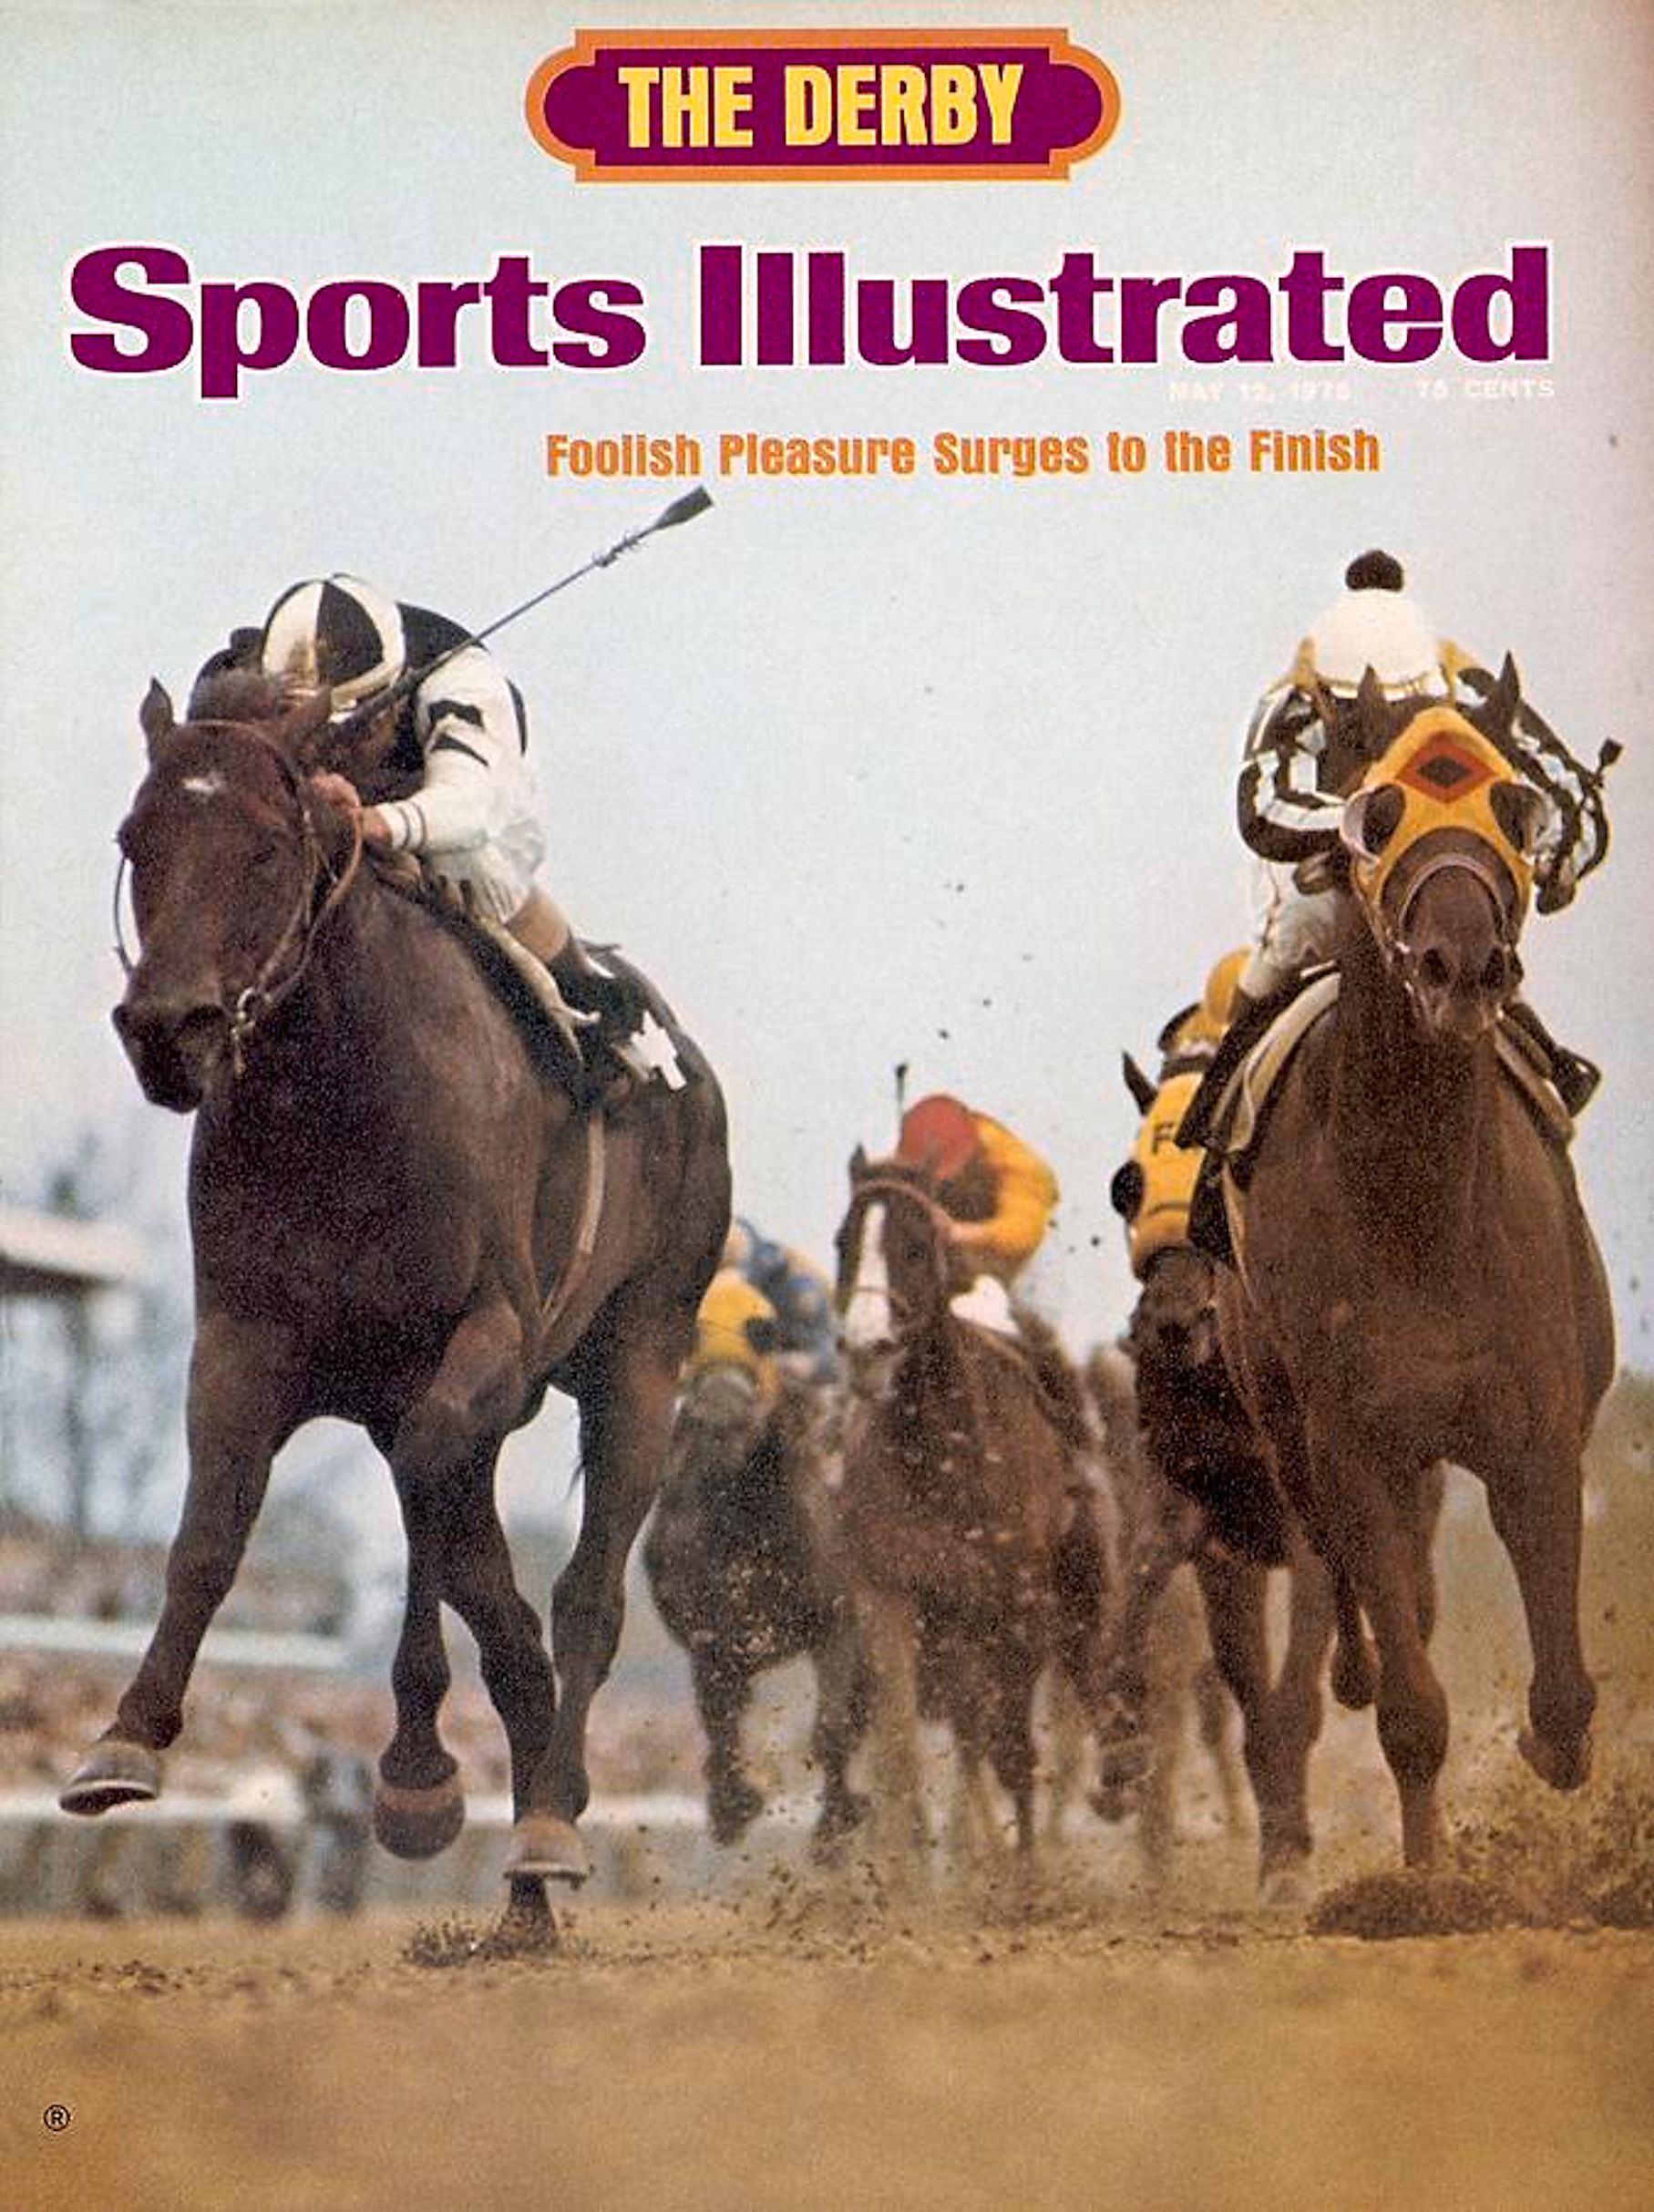 Jacinto Vasquez and Foolish Pleasure on the cover of "Sports Illustrated" in 1975 (Sports Illustrated)